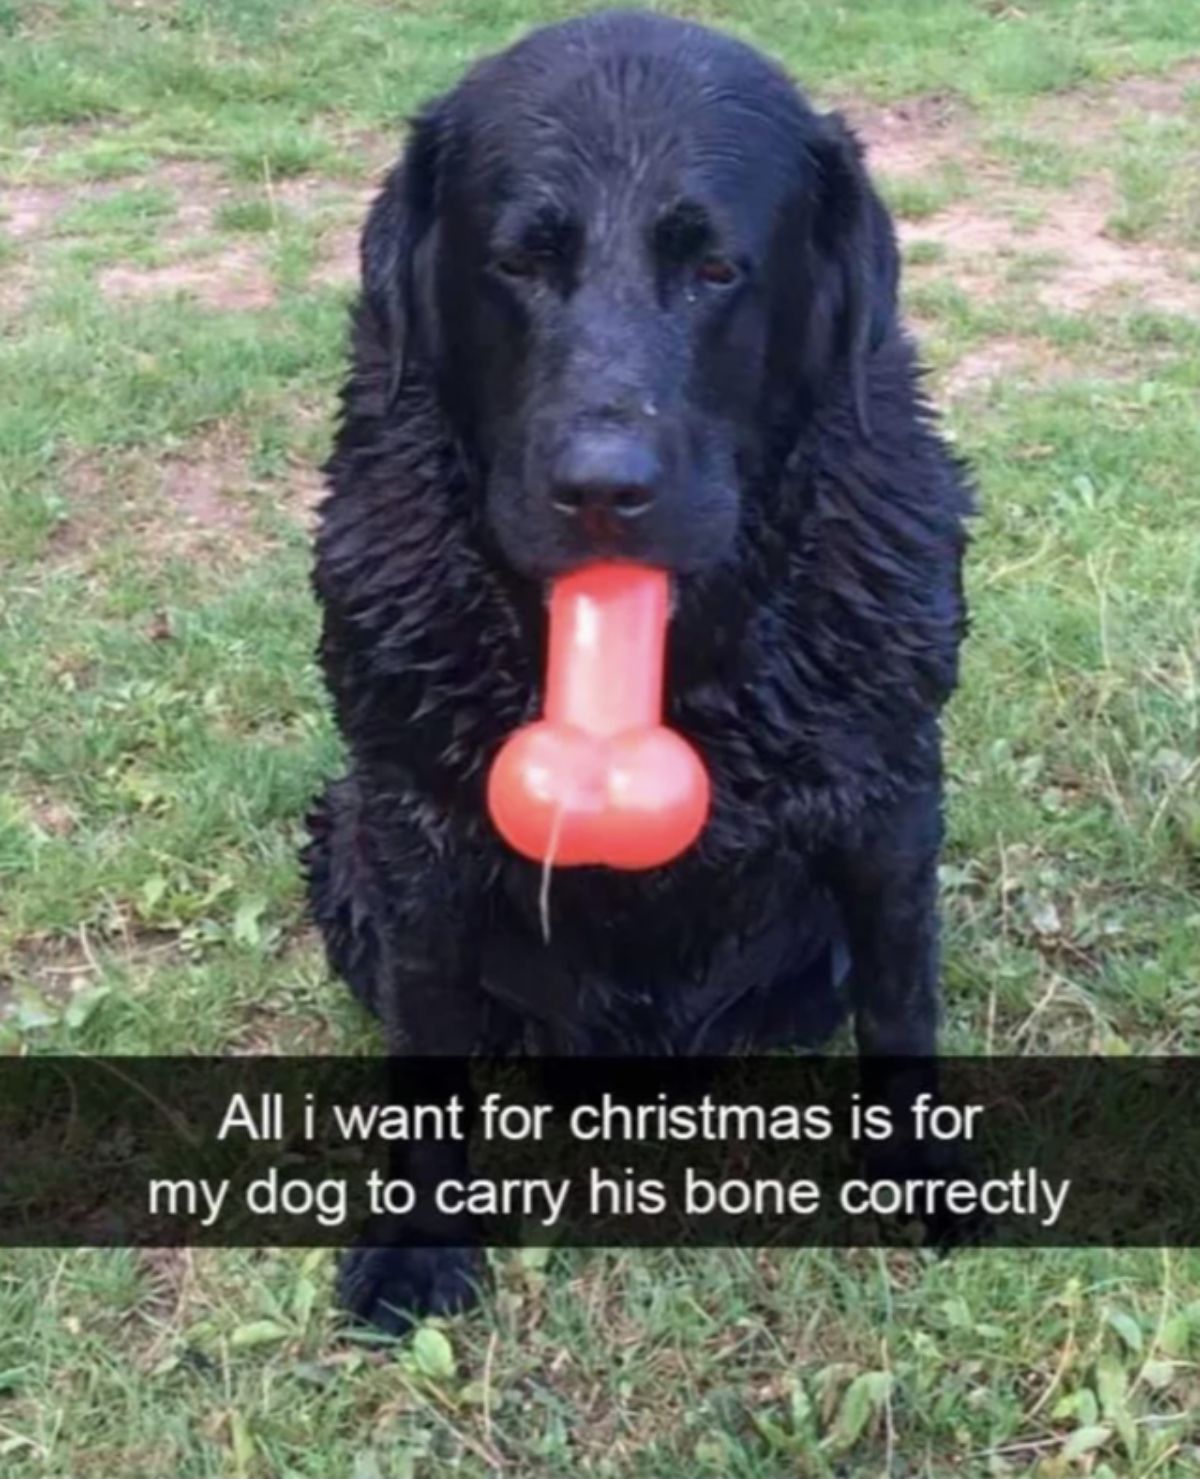 black dog sitting on grass holding a red plastic bone with it looking like a penis